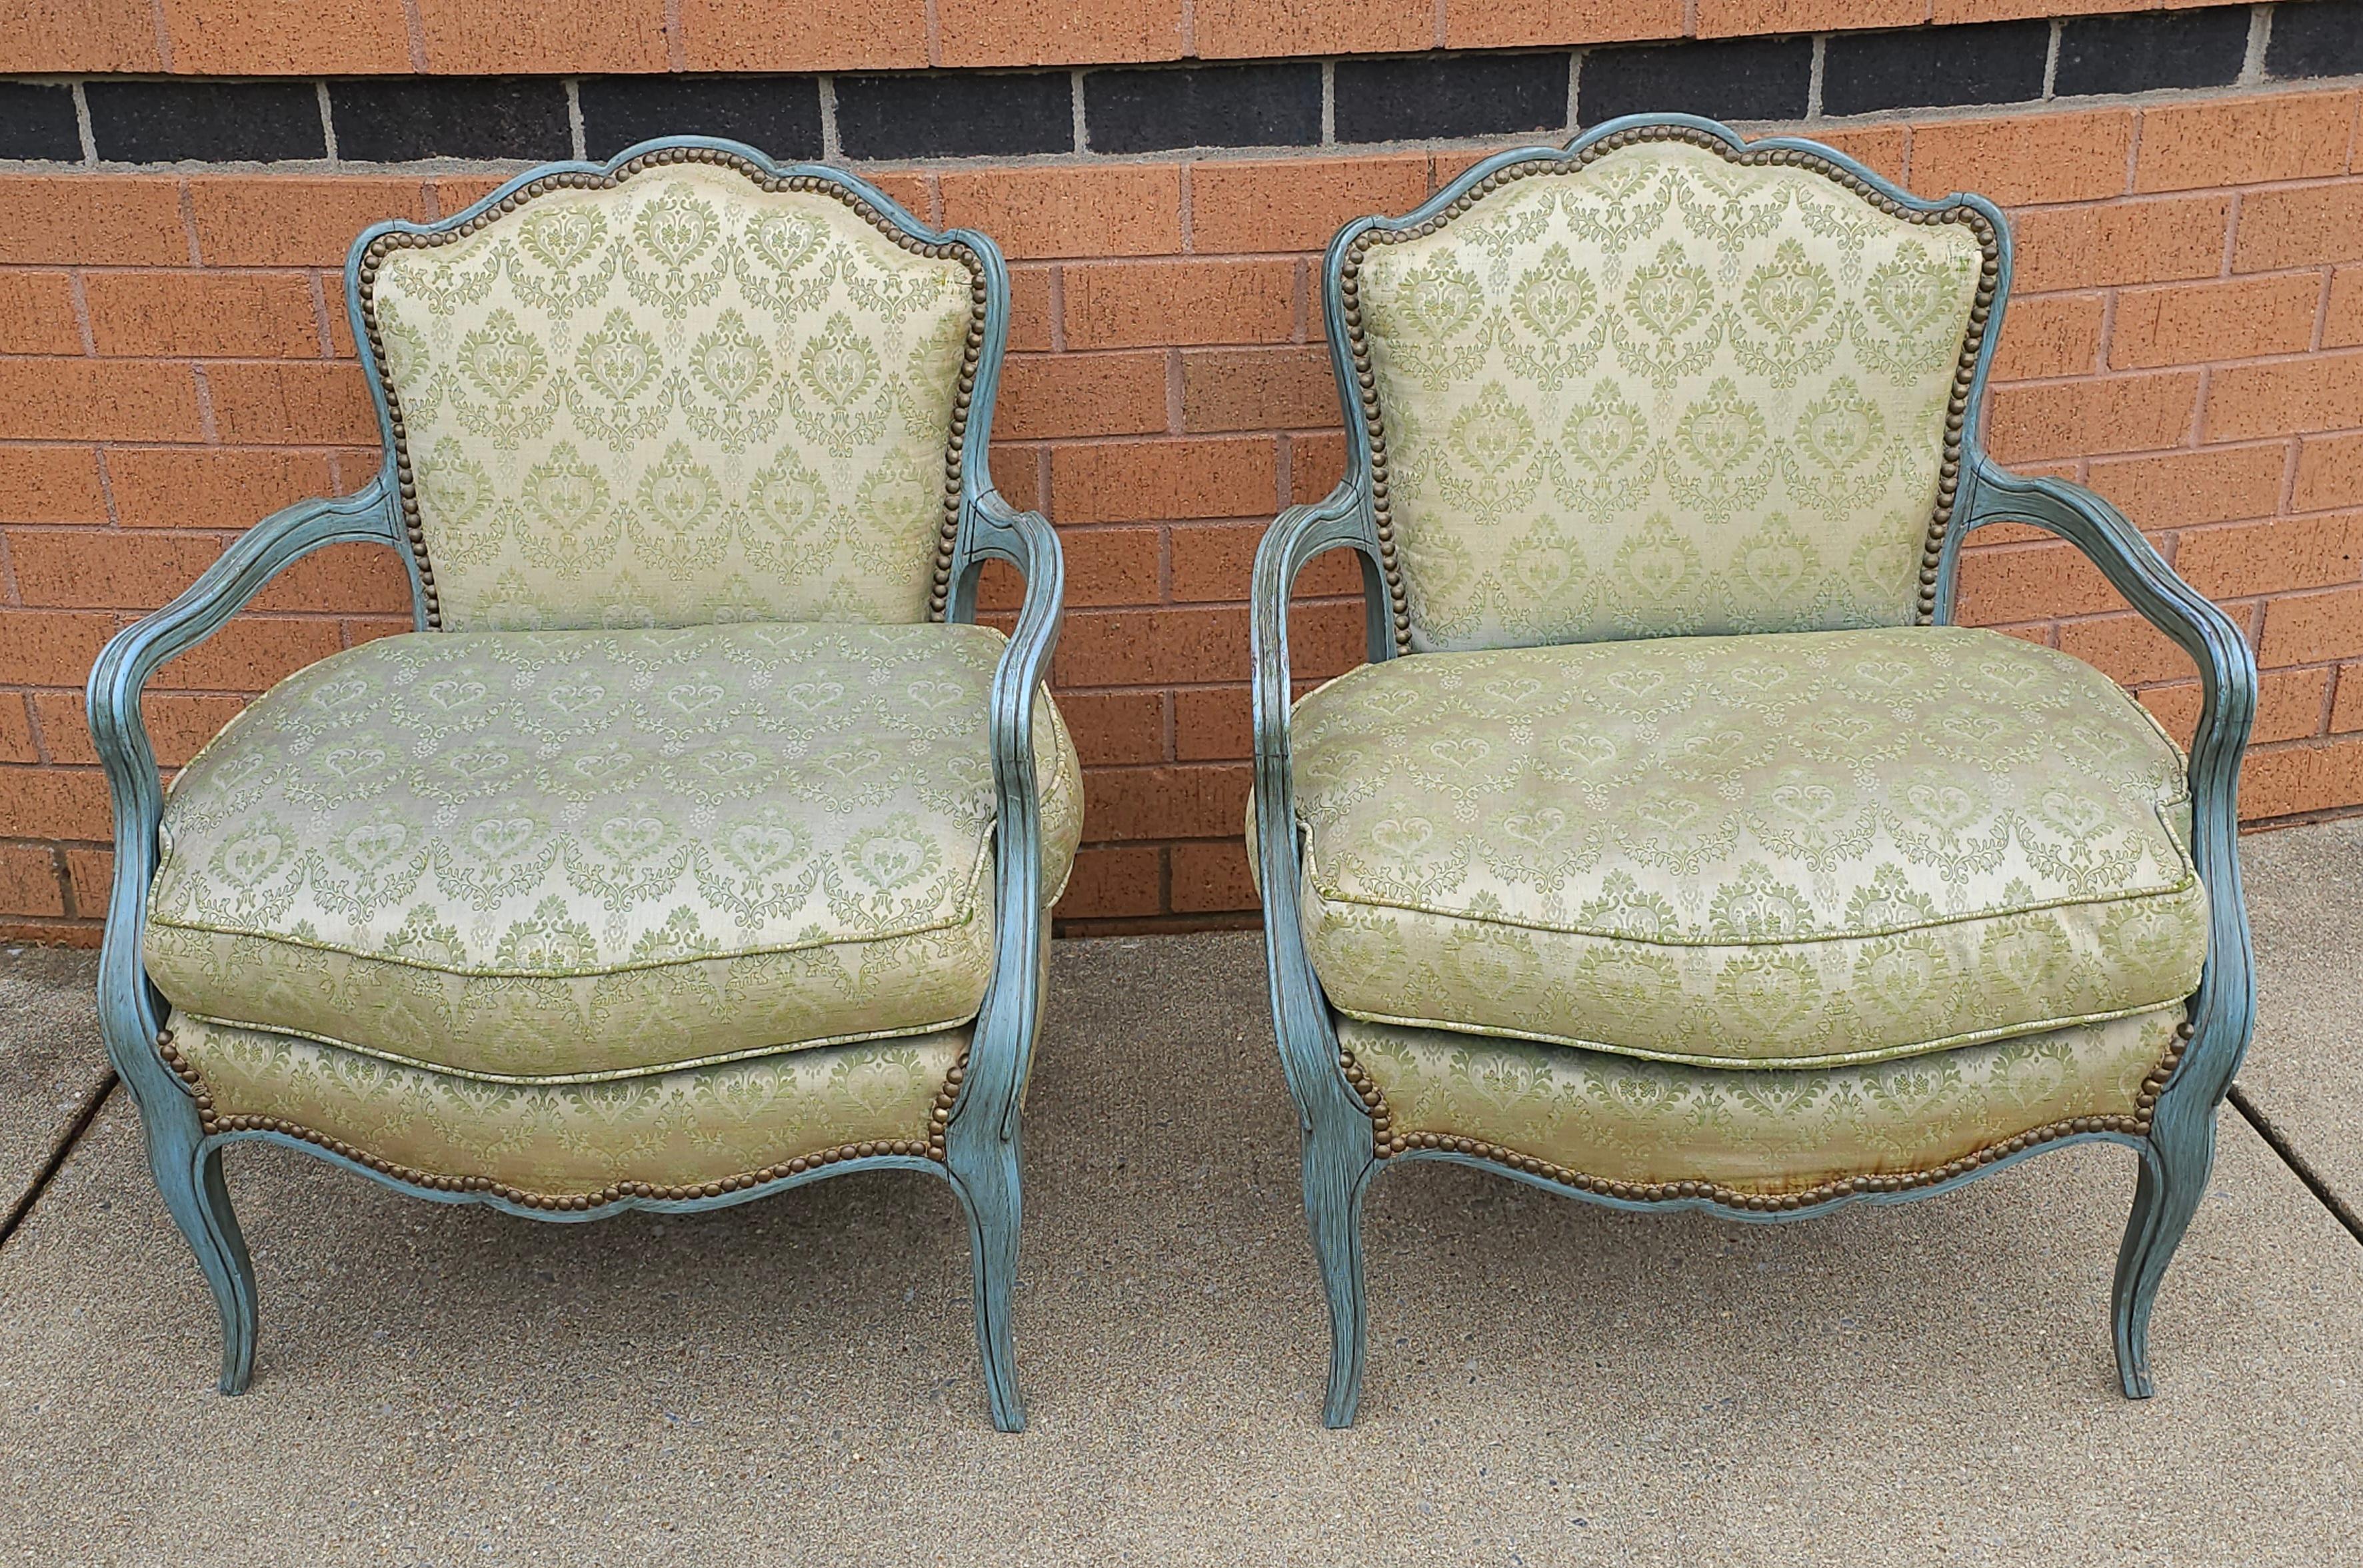 A Pair French Provincial Green Painted And Upholstered Low Fauteuils / Bergeres chairs. Measure 28